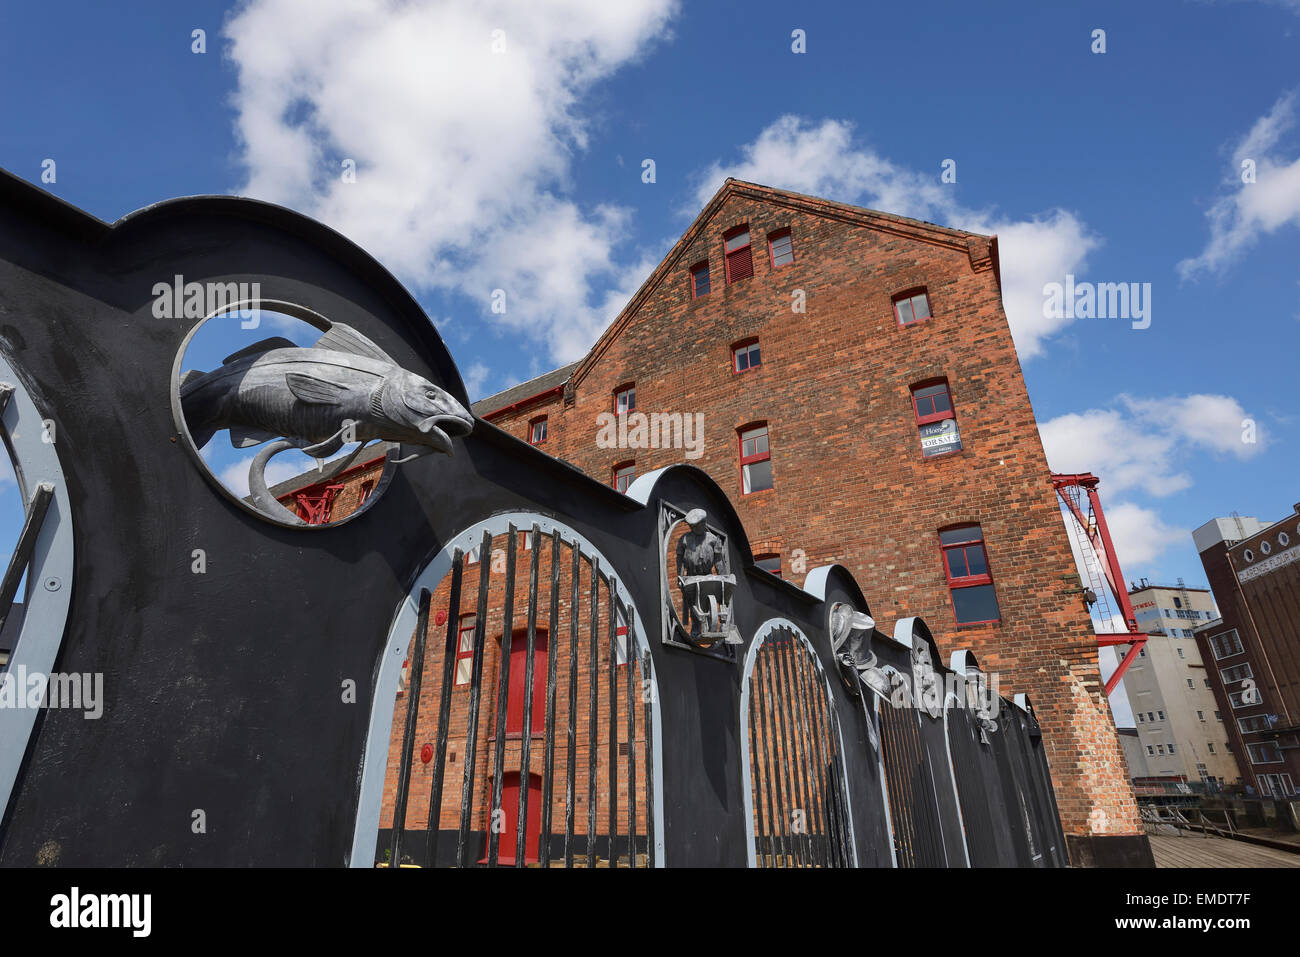 Decorative metalwork and old buildings in the Museum Quarter of Hull city centre UK Stock Photo